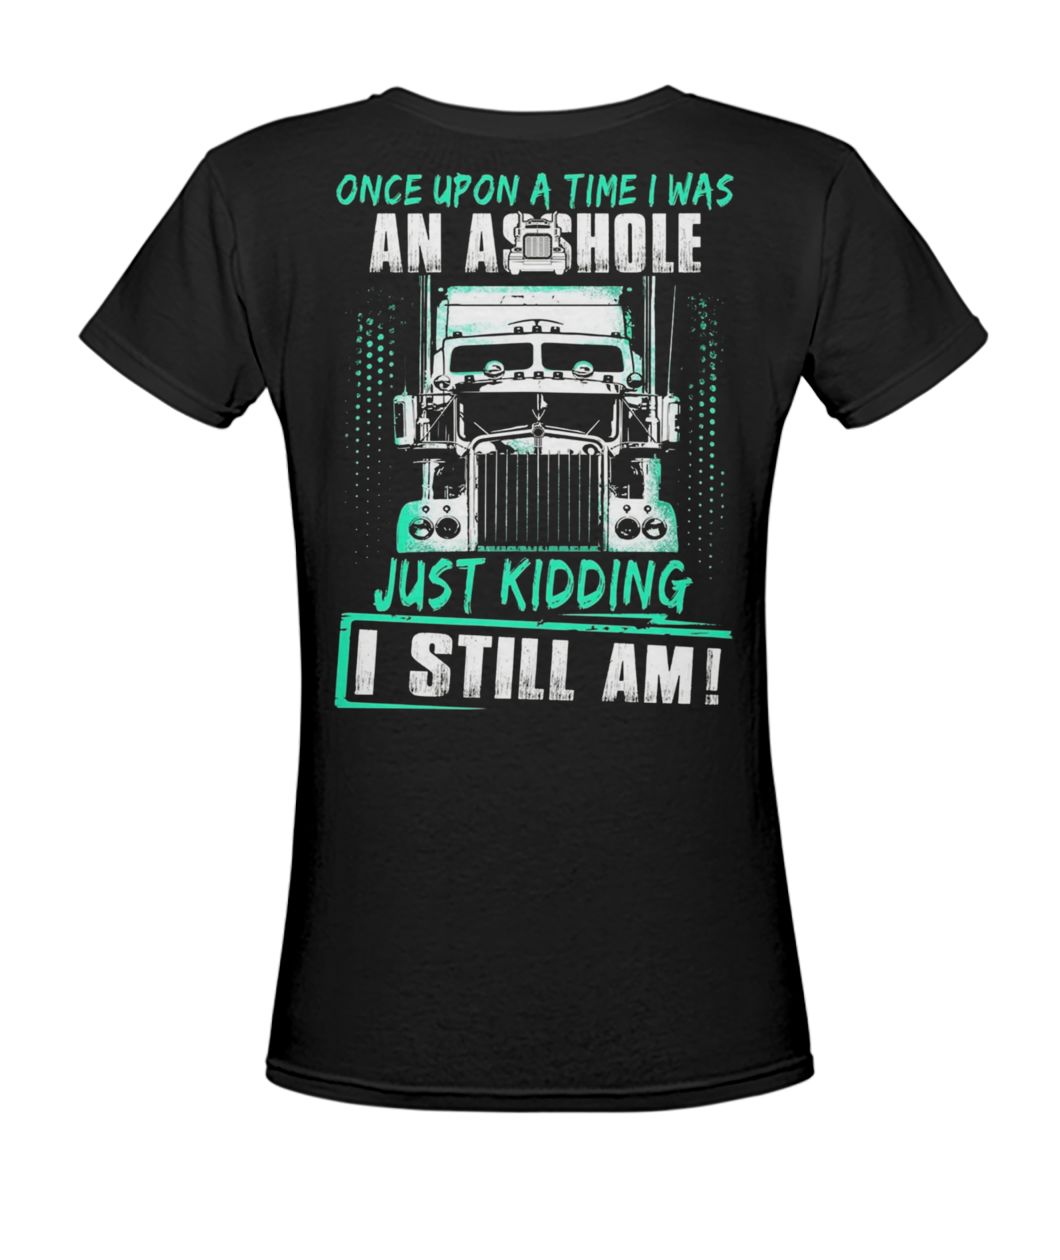 Trucker once upon a time I was an asshole just kidding I still am women's v-neck